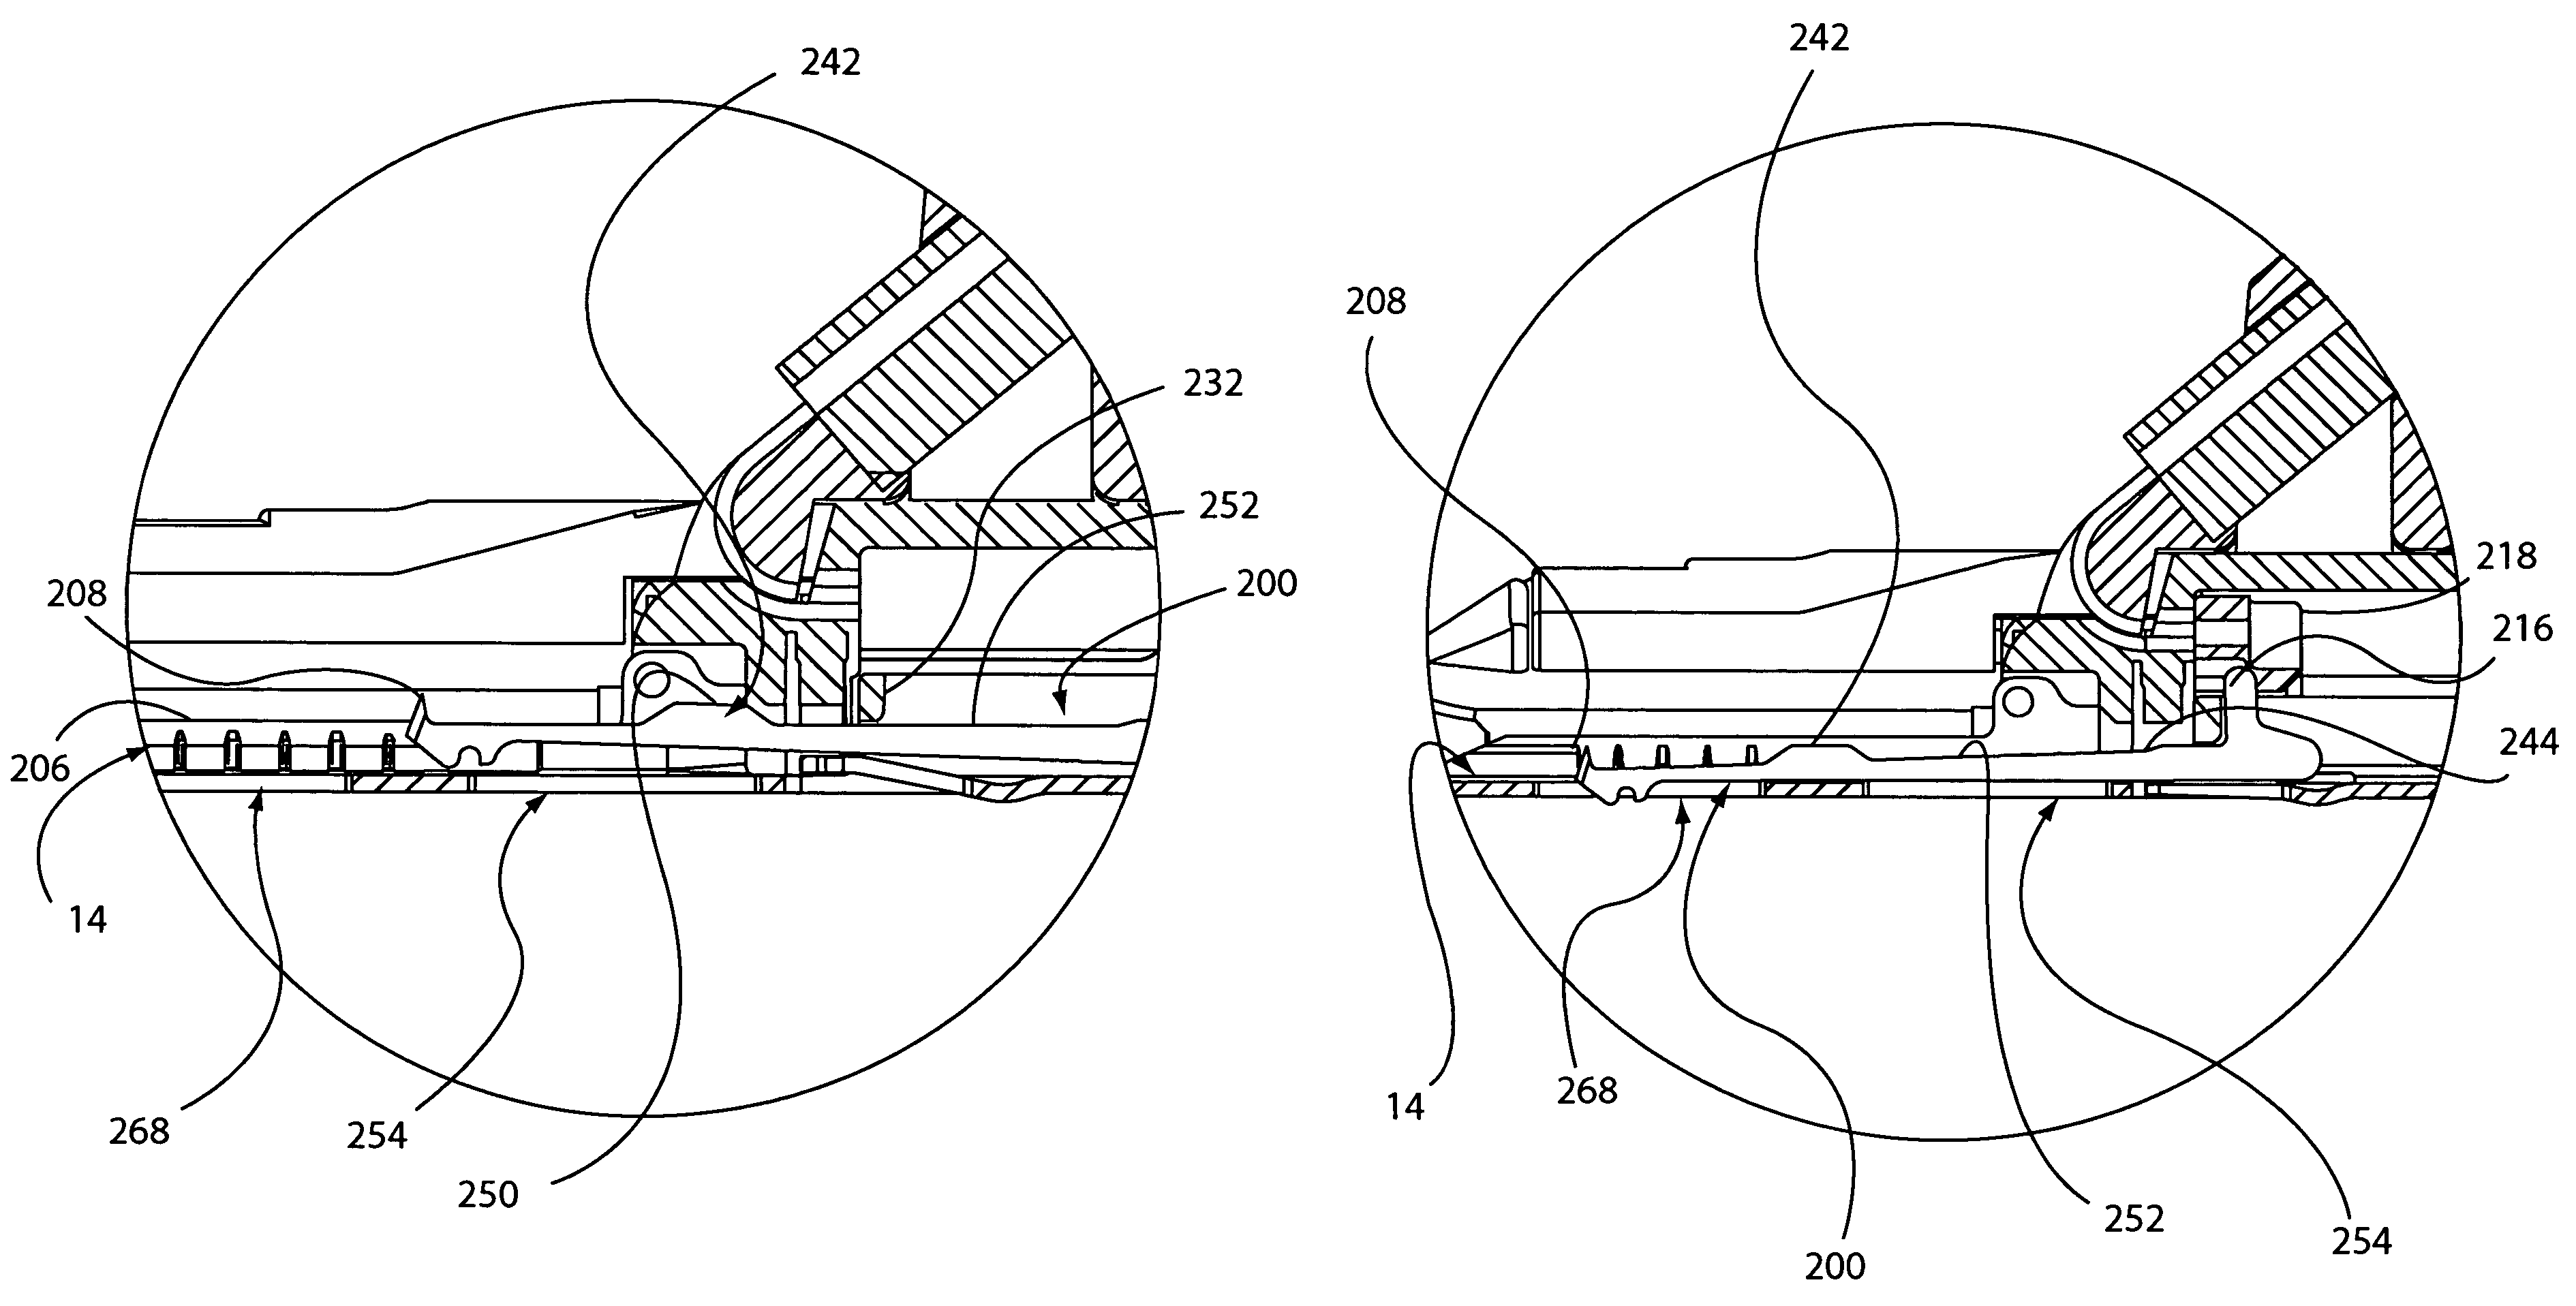 System for performing anastomosis